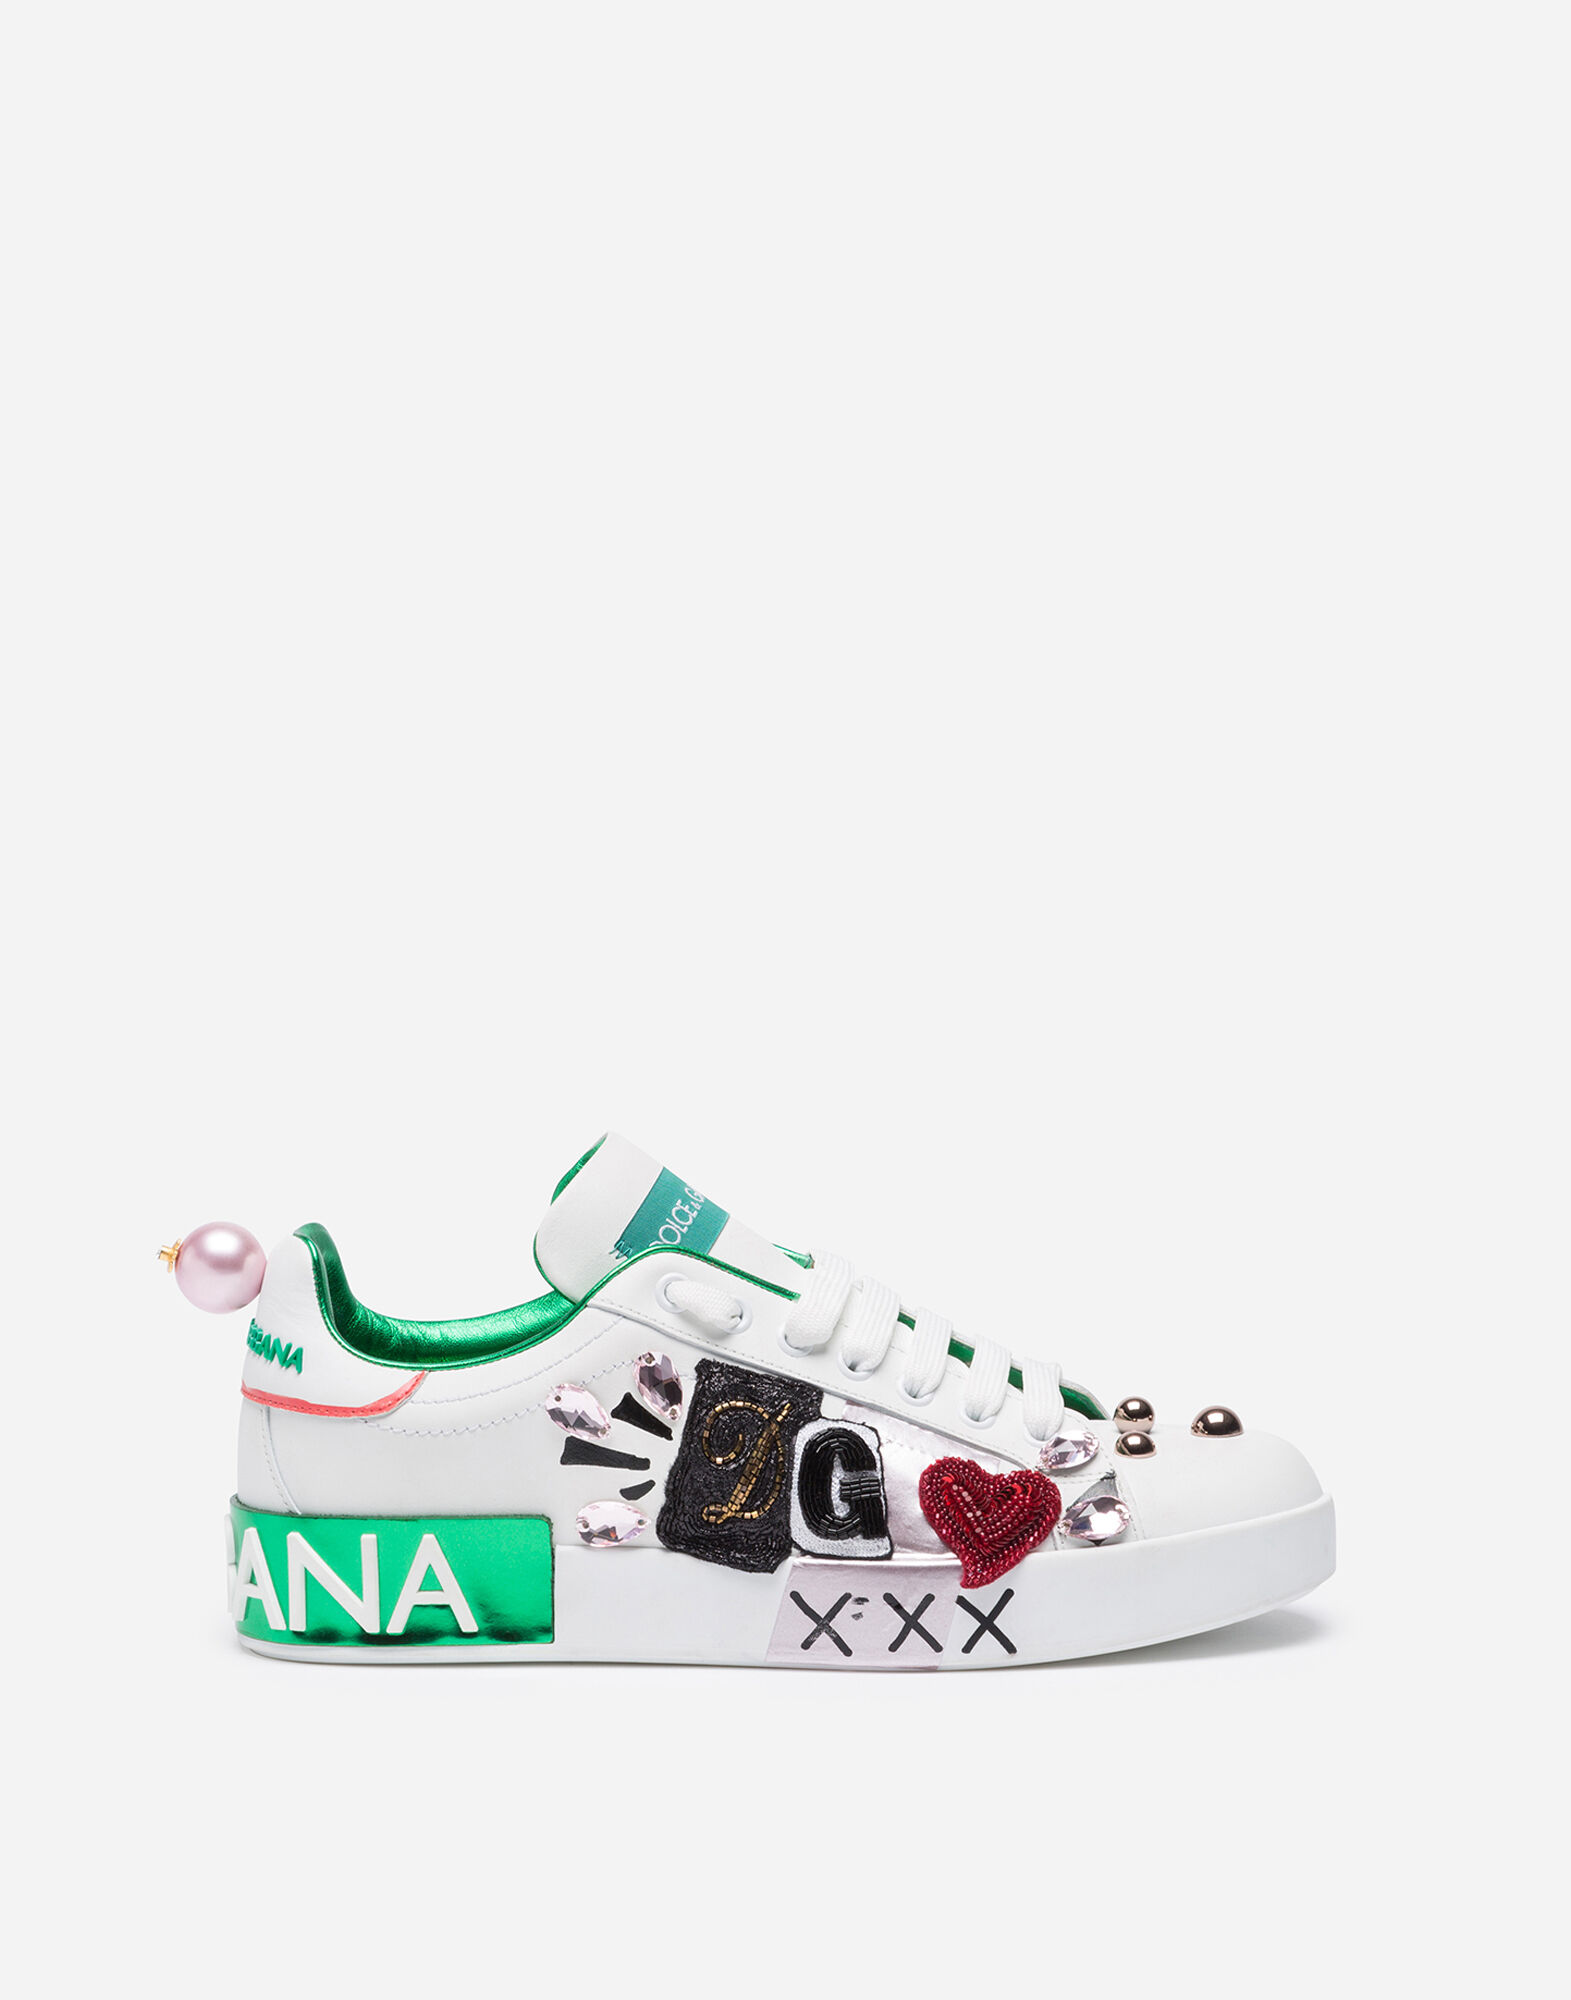 Portofino sneakers in nappa calfskin with patch and embroidery